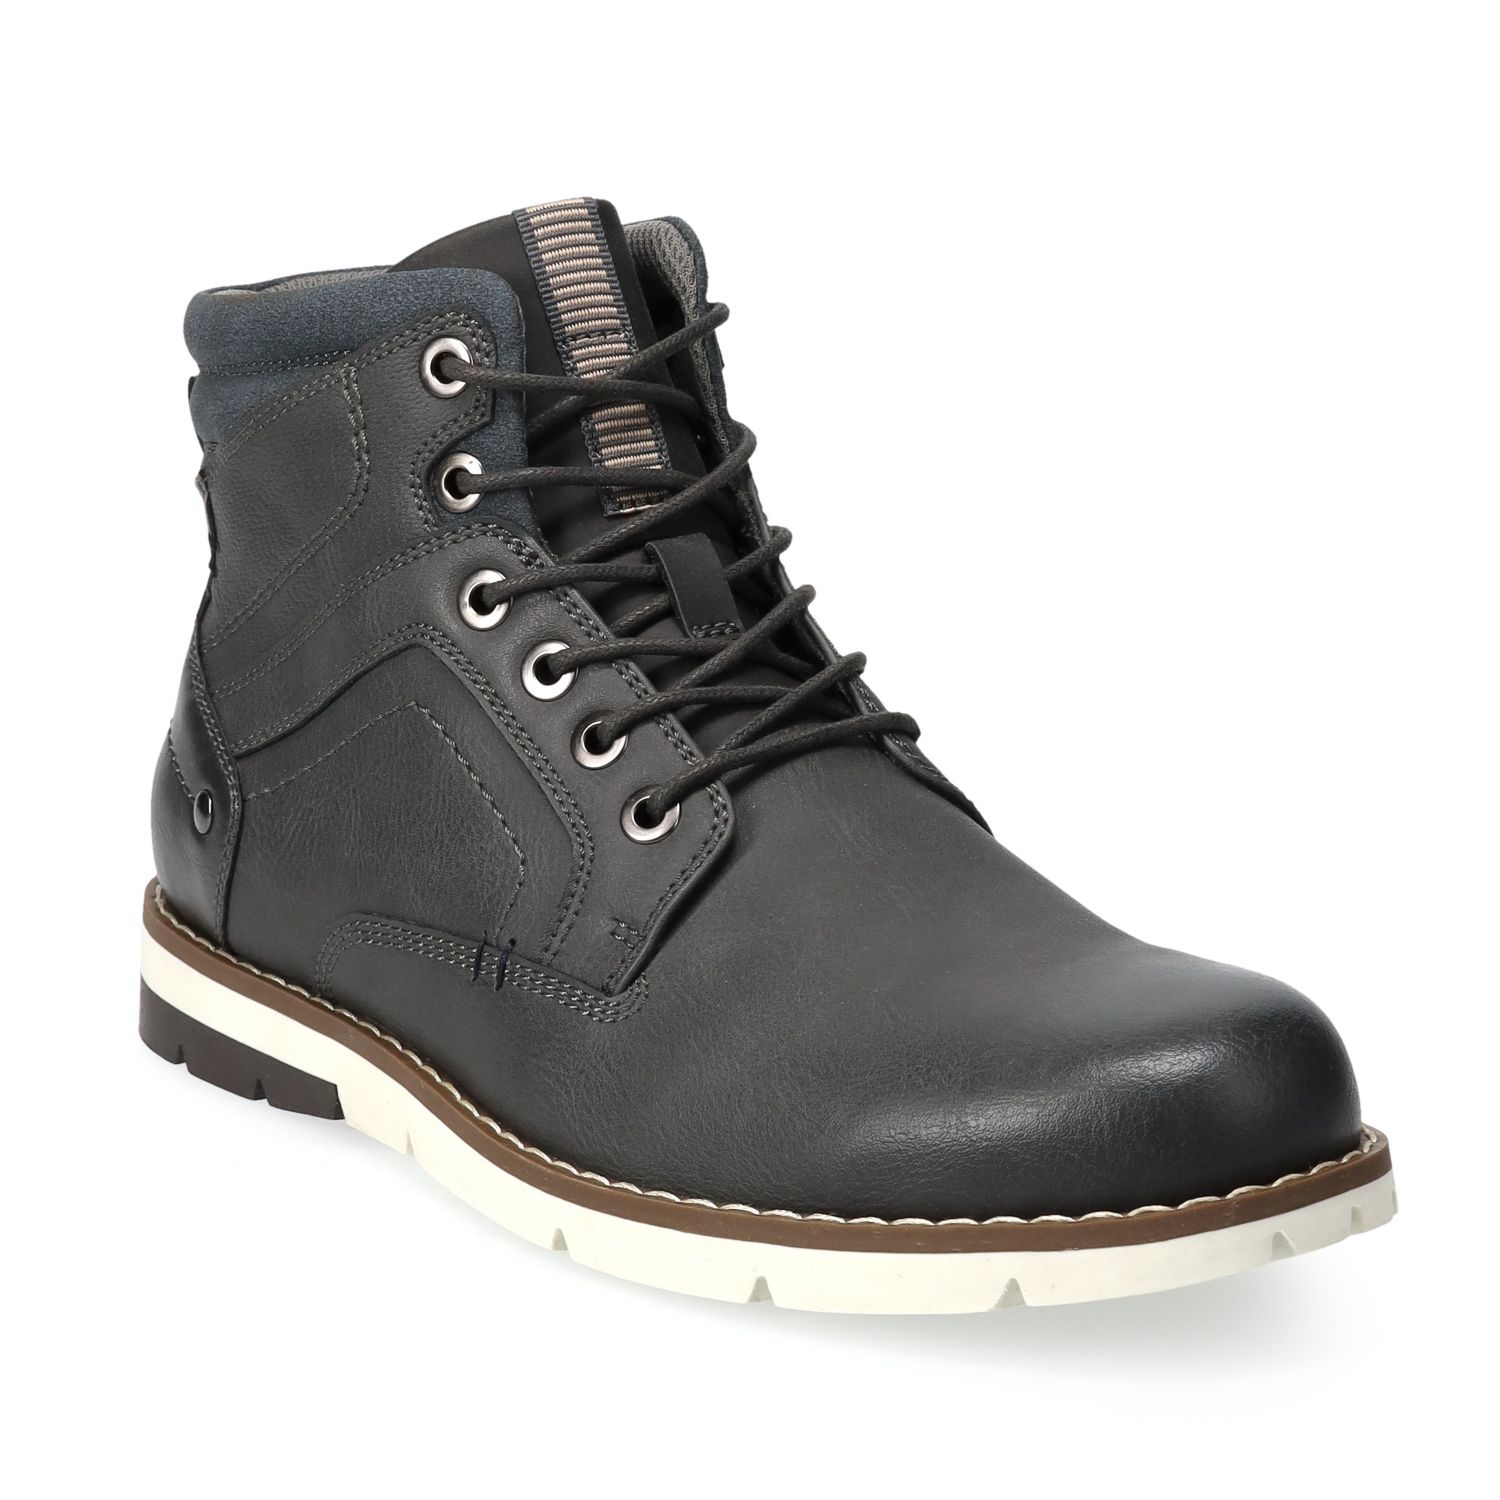 Mens Casual Boots: Perfect Boots To 